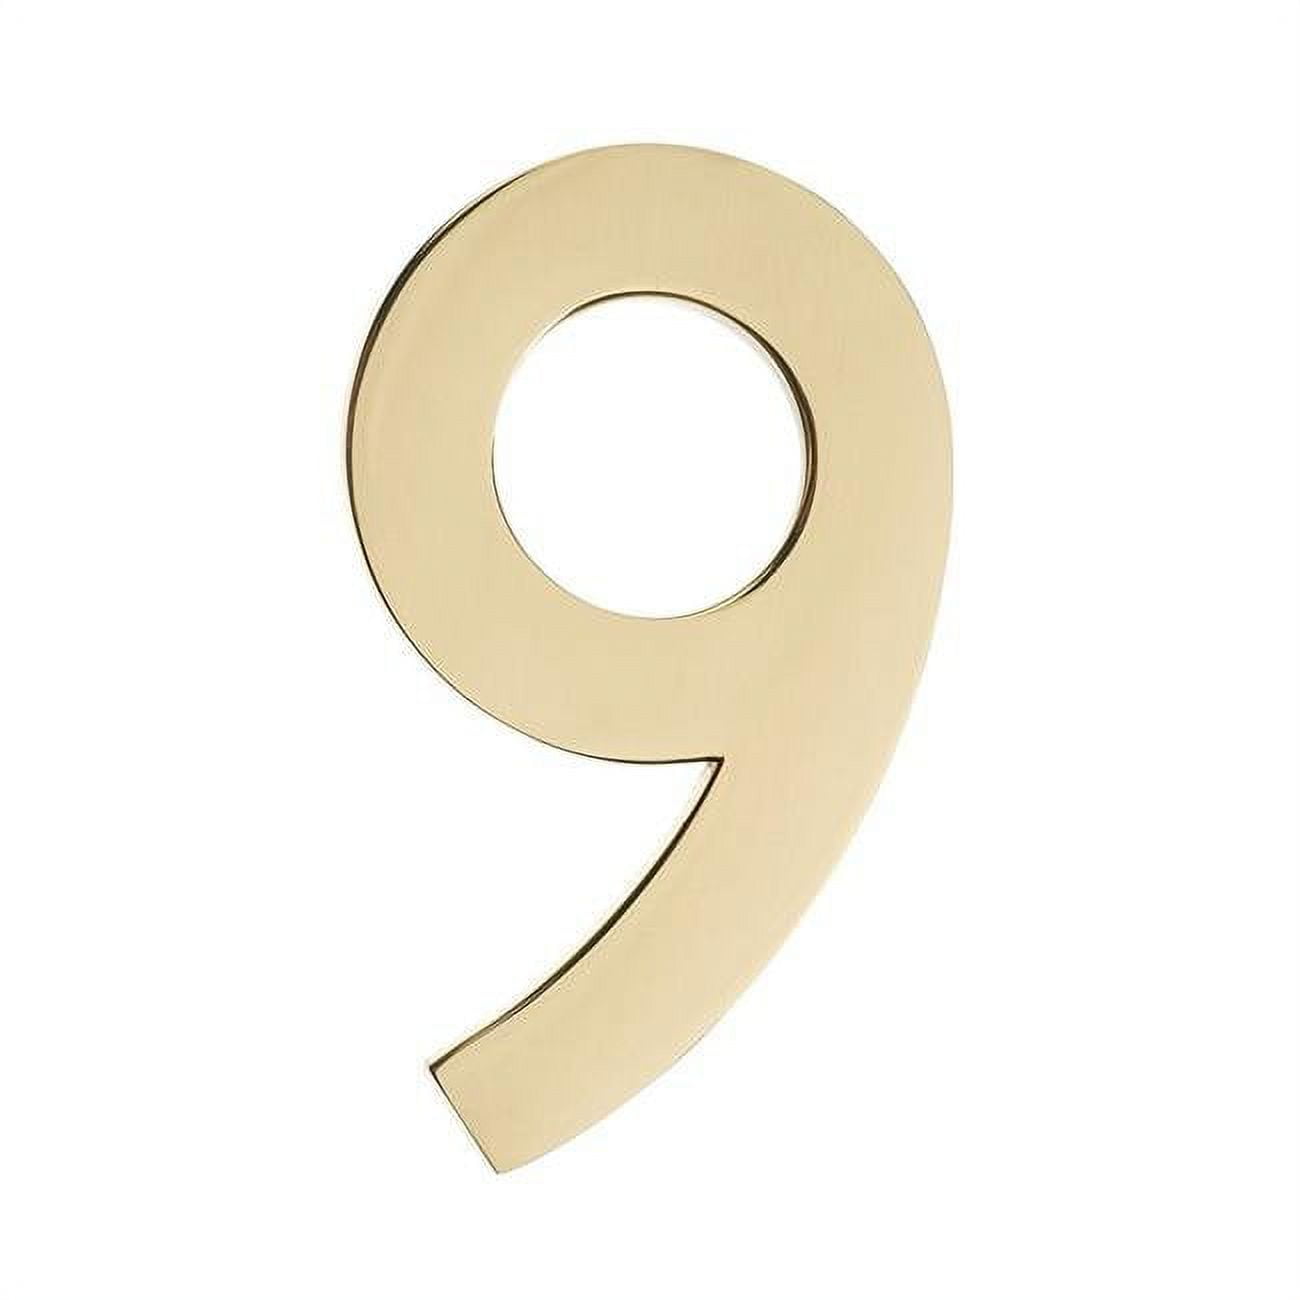 3585pb-9 House Number 9, Polished Brass - 5 In.